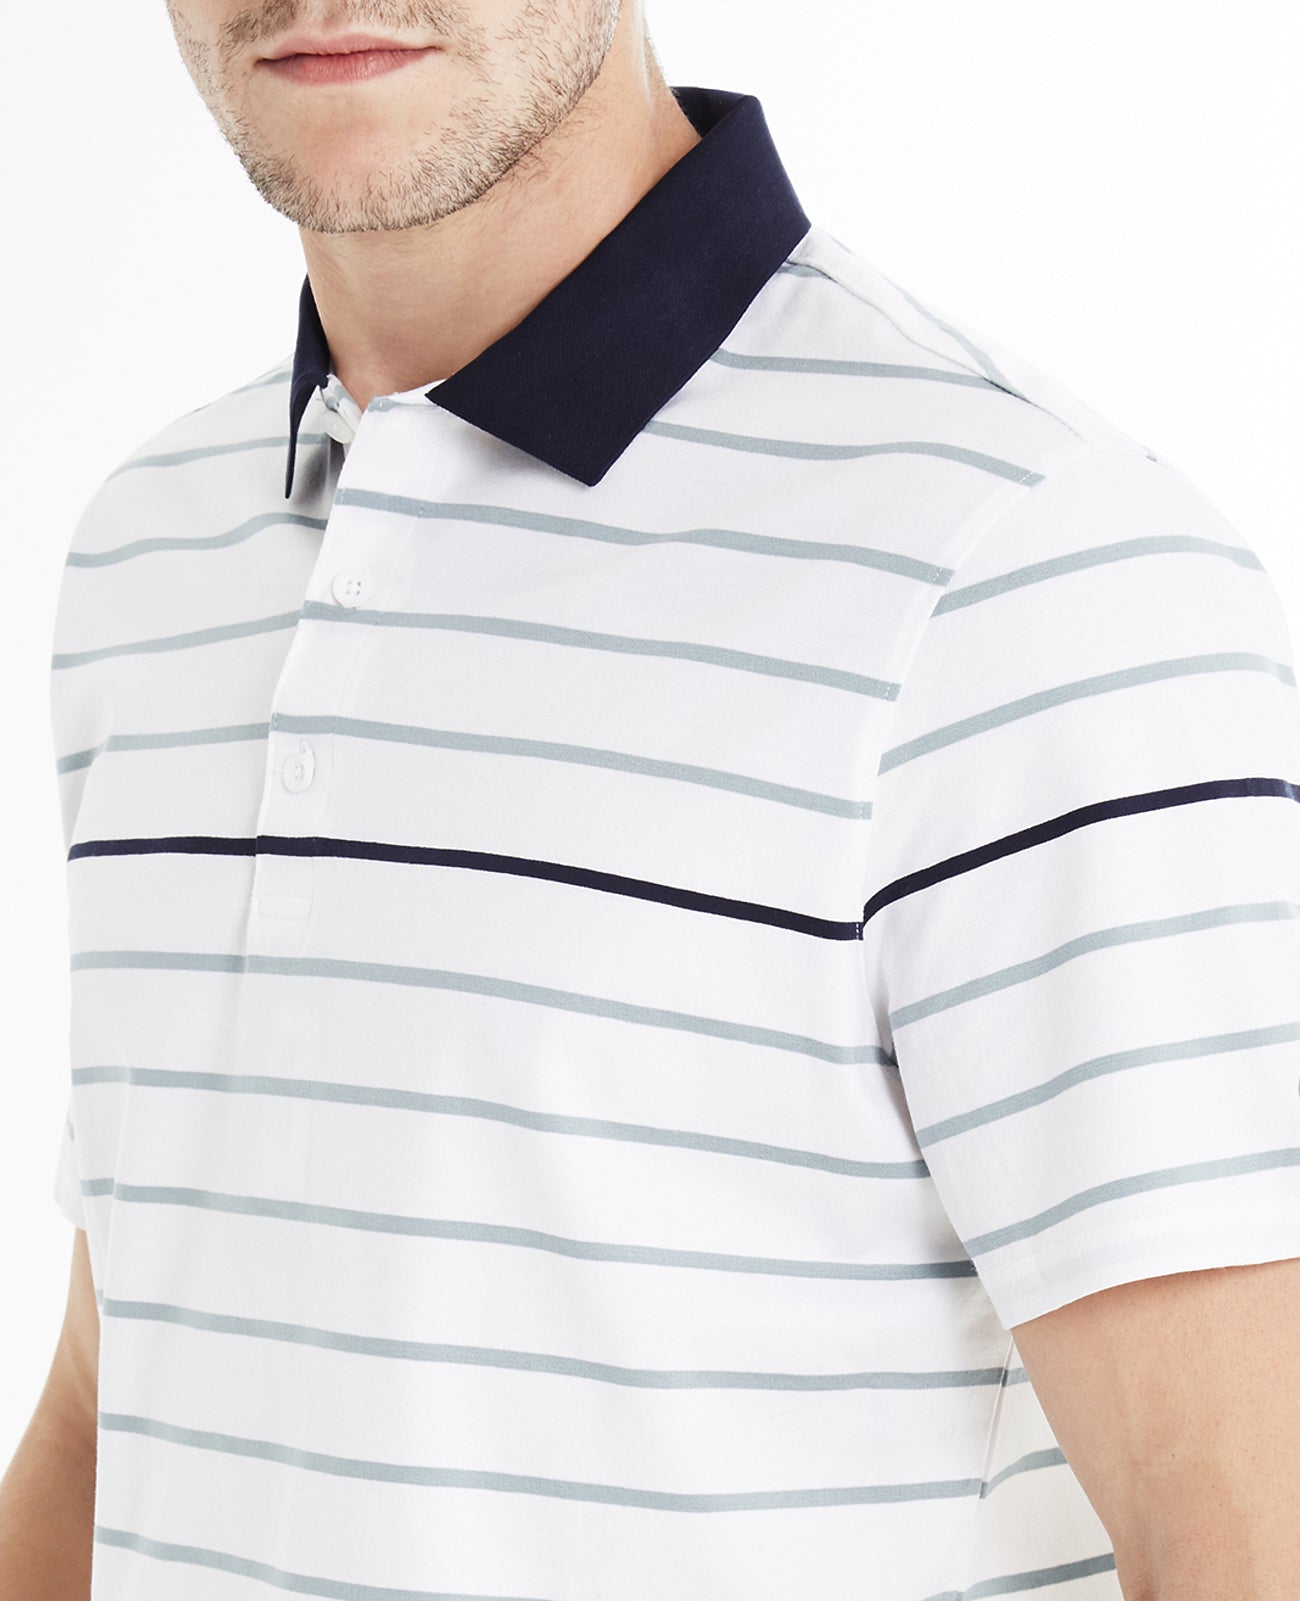 Farrell Stripe Polo Bright White Agave Green Naval Green Label Collection Men Tops Photo 4